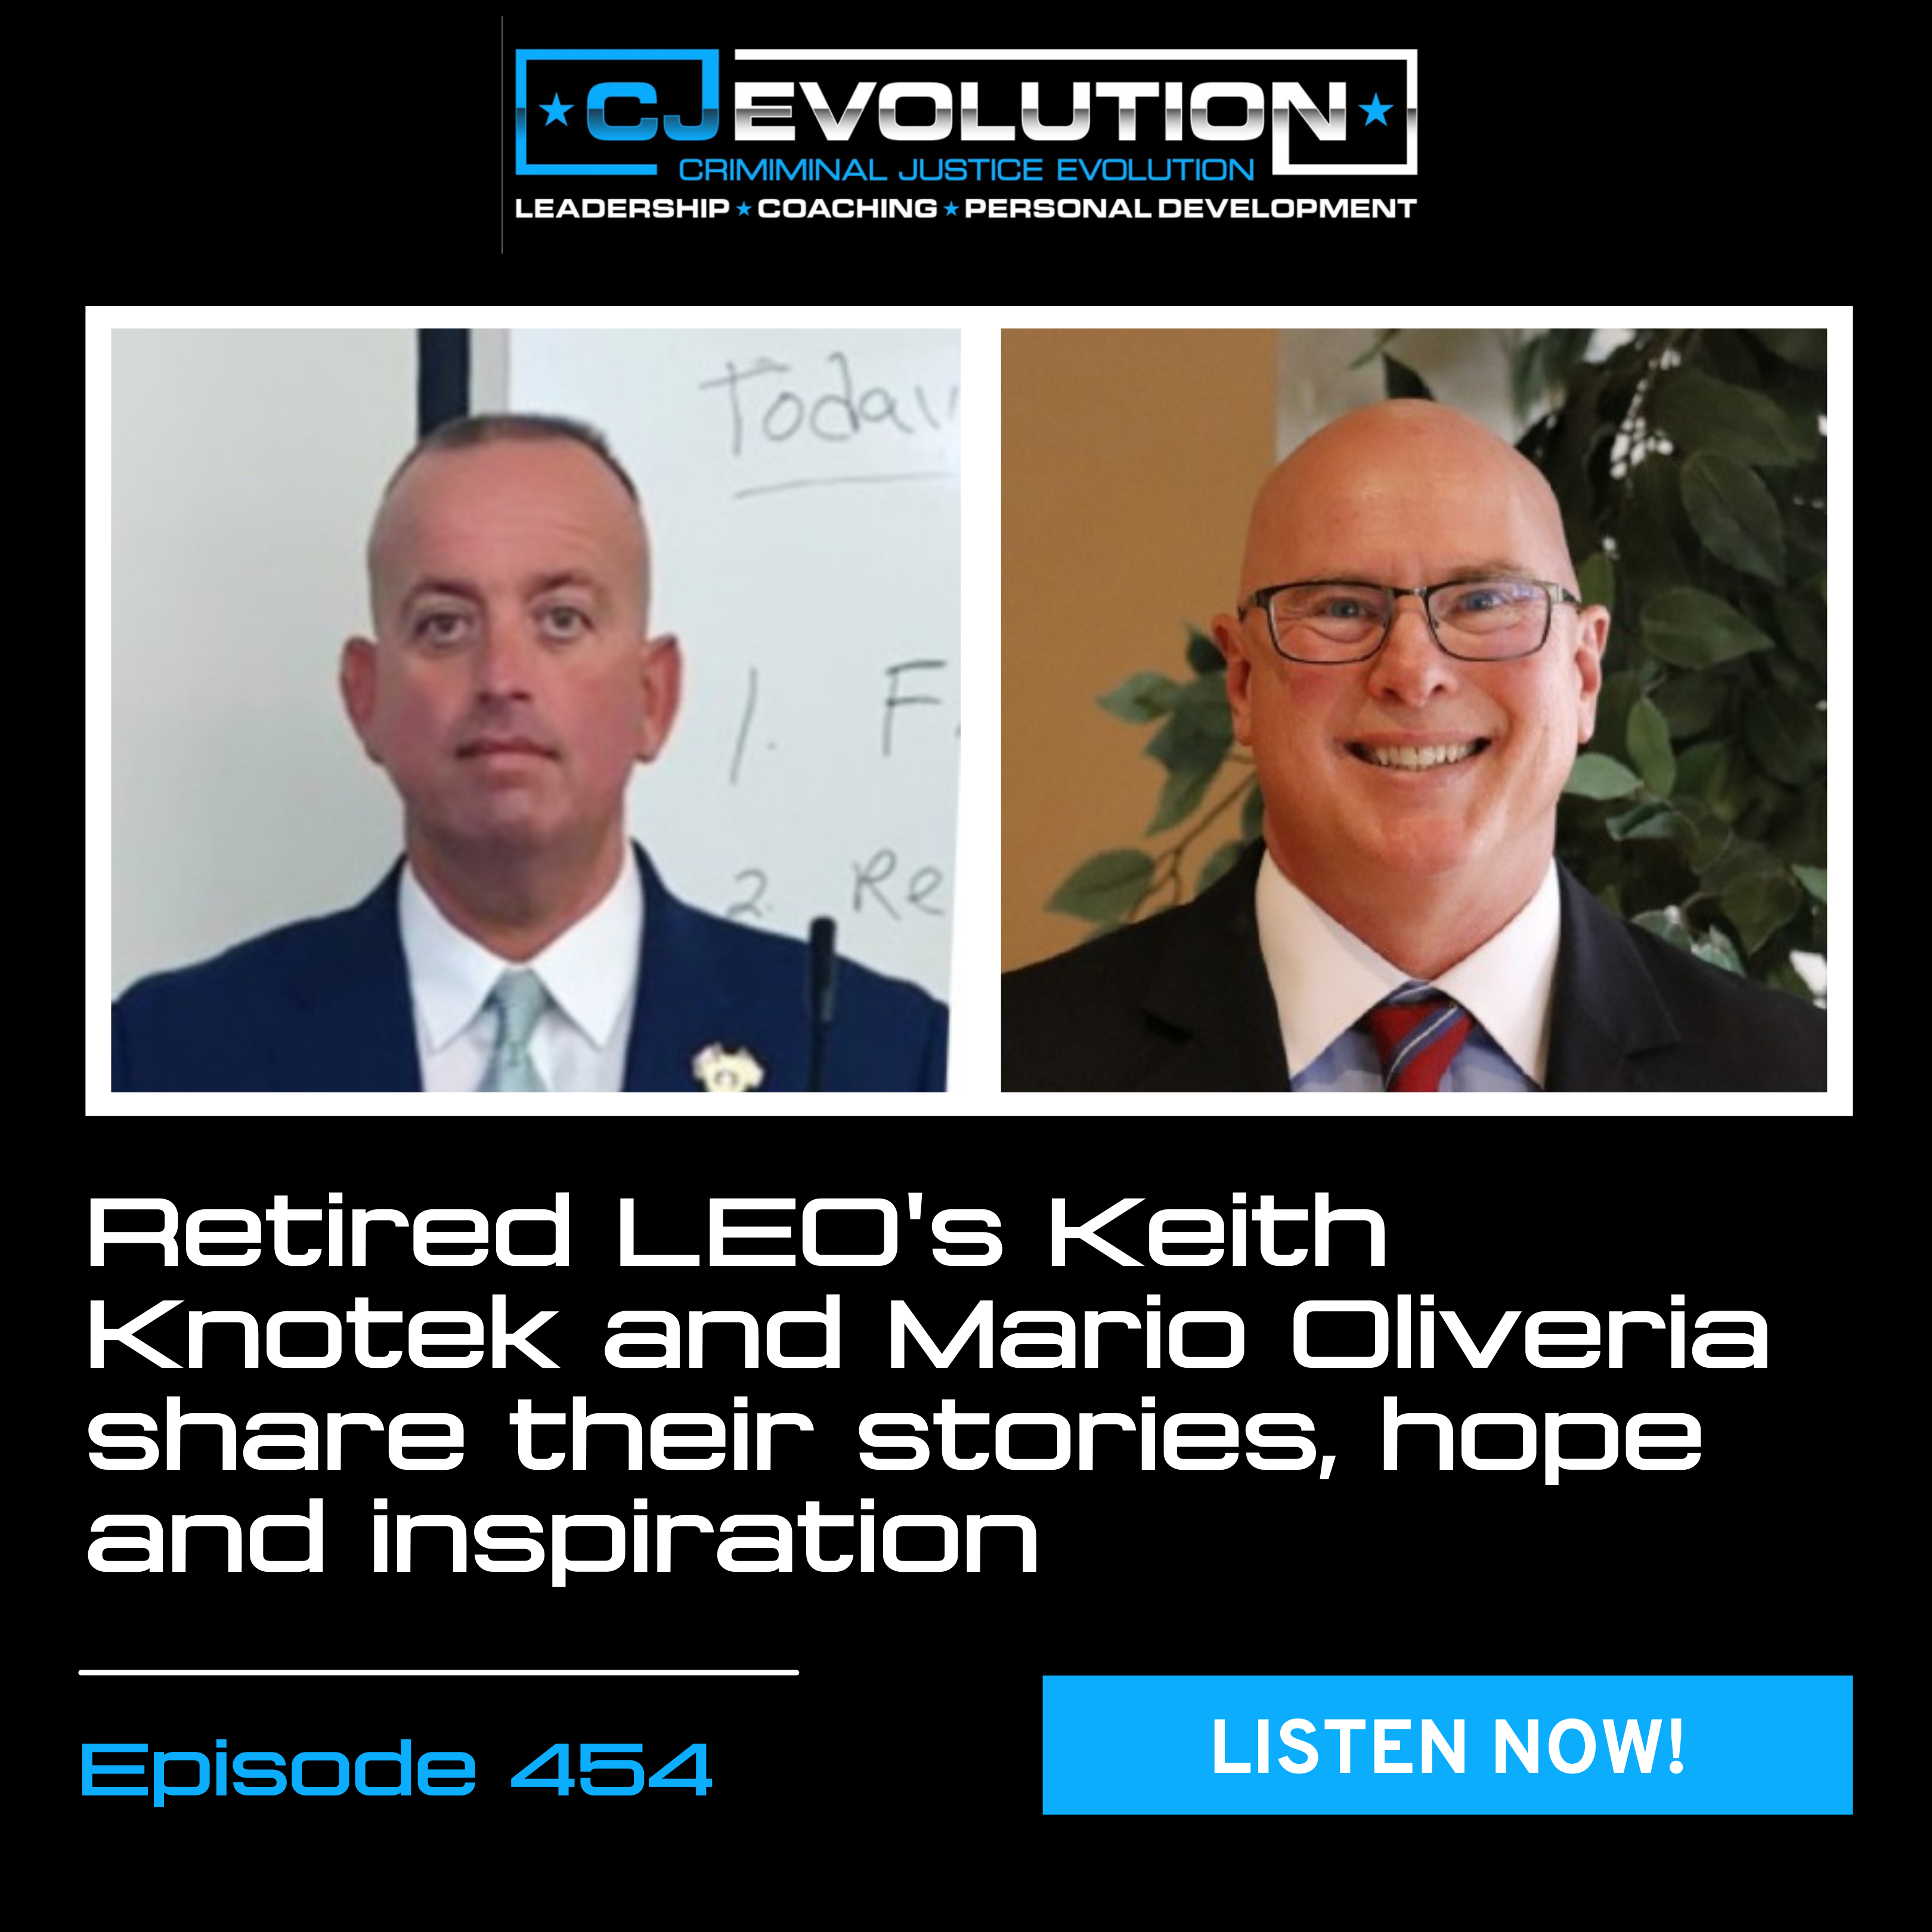 Ep. 454: Retired LEO’s Keith Knotek and Mario Oliveria and Their Stories and Hope and Inspiration